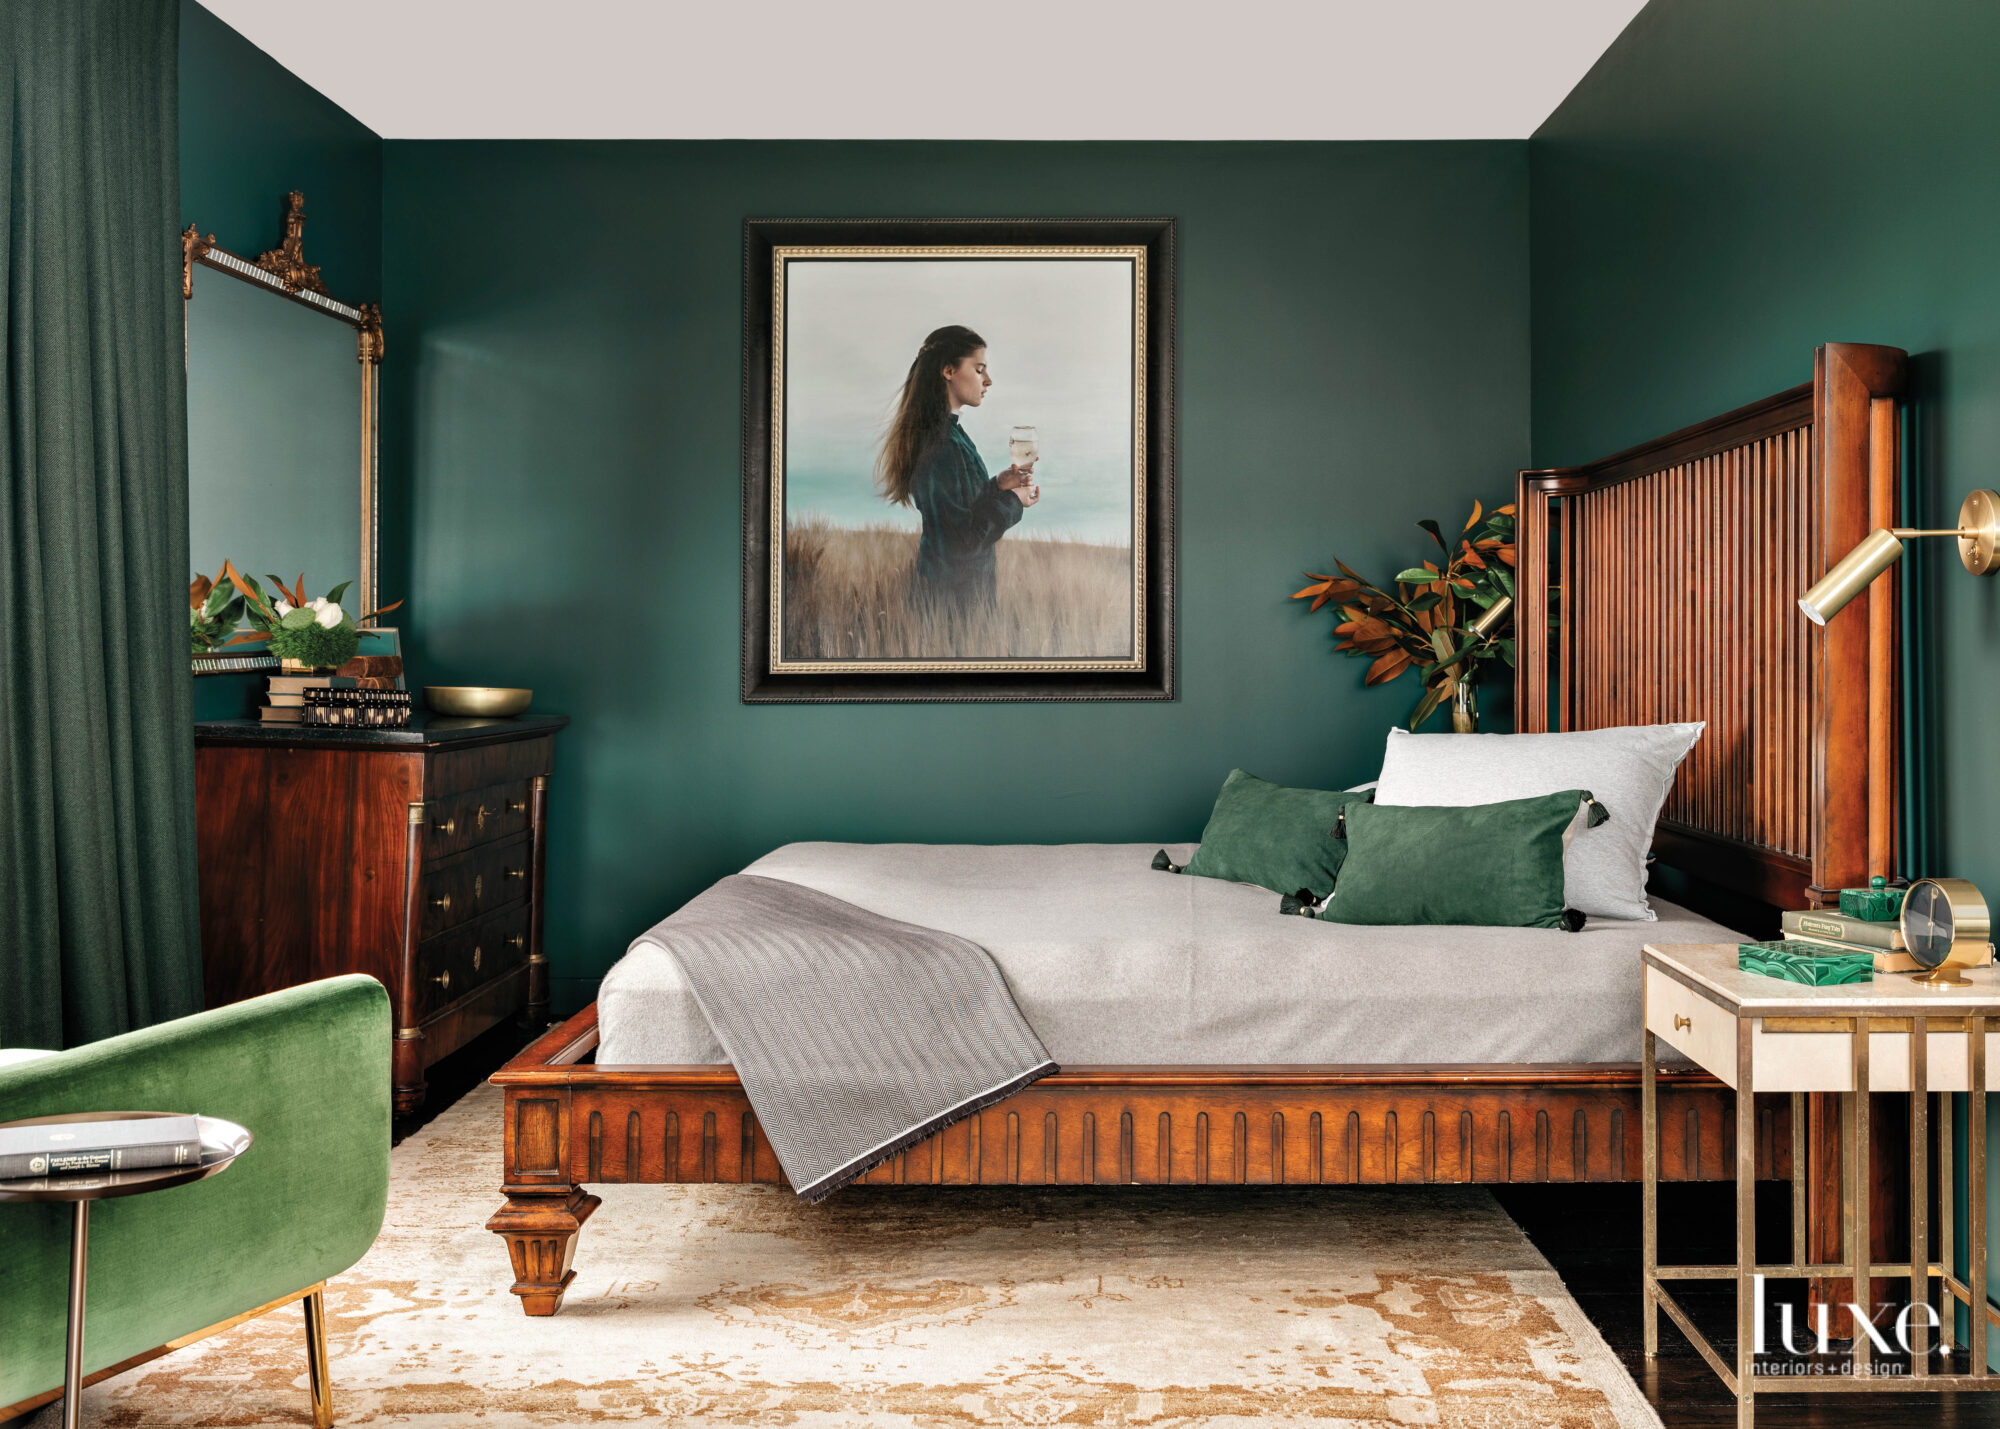 A guest bedroom is done in shades of green.